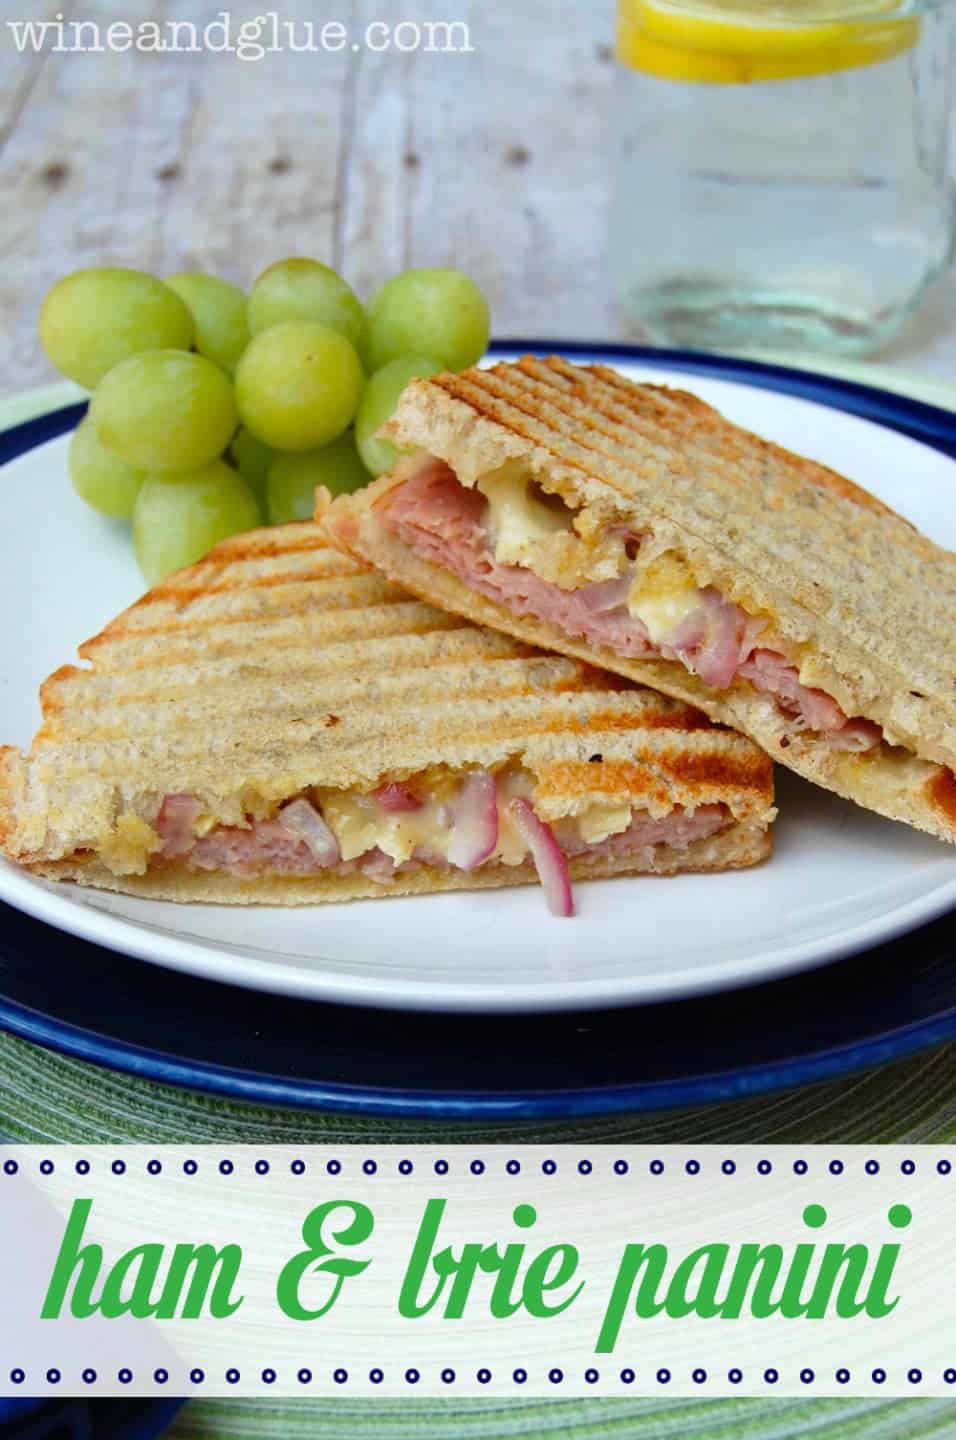 Ham and Brie Panini mixes the most delicious flavors into an easy panini that will make you feel like you are having lunch in a fancy cafe via www.wineandglue.com